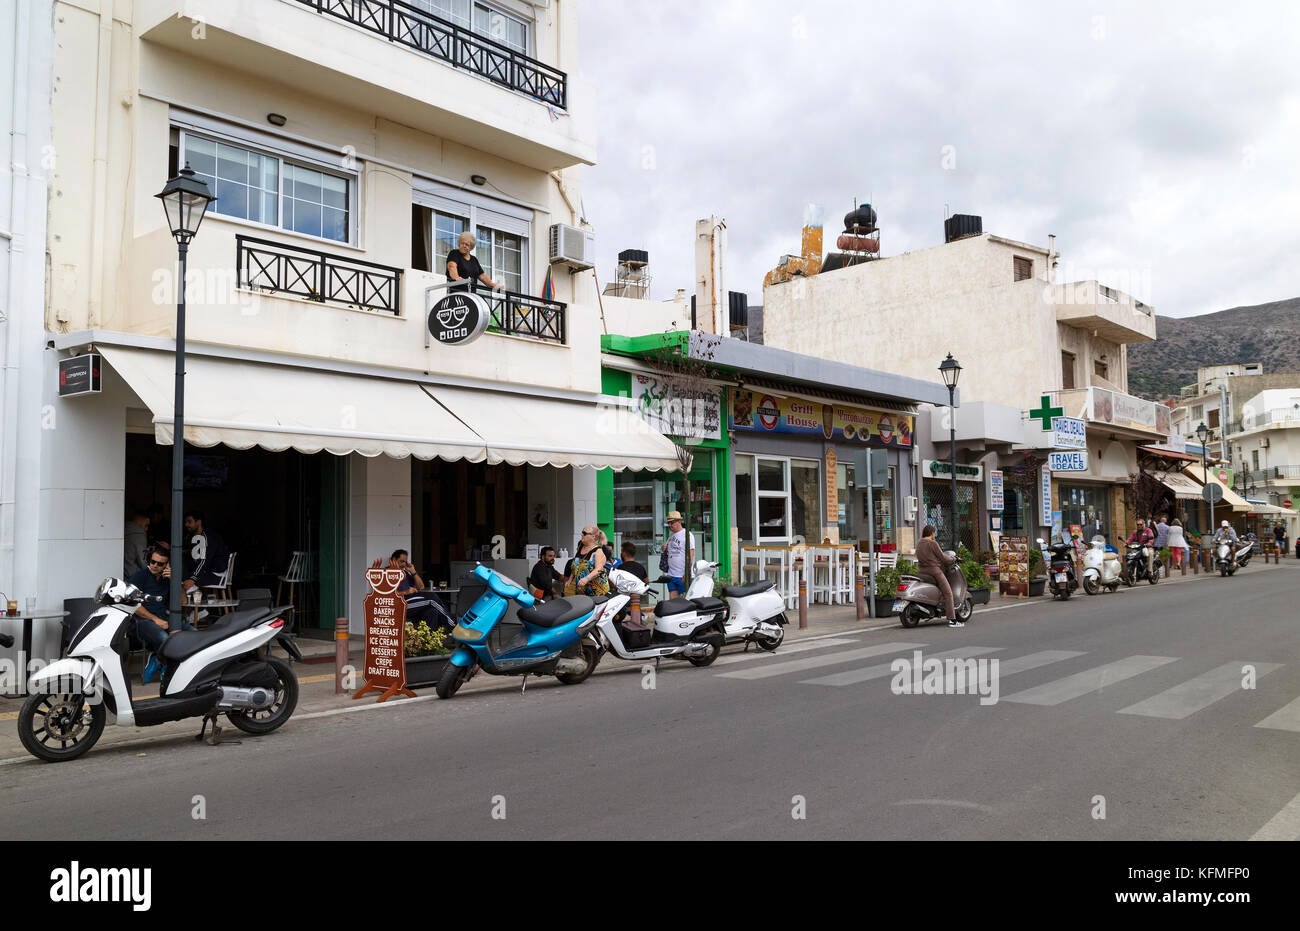 Malia, Crete, Greece. Scooters parked outside shops along the main street. October 2017 Stock Photo